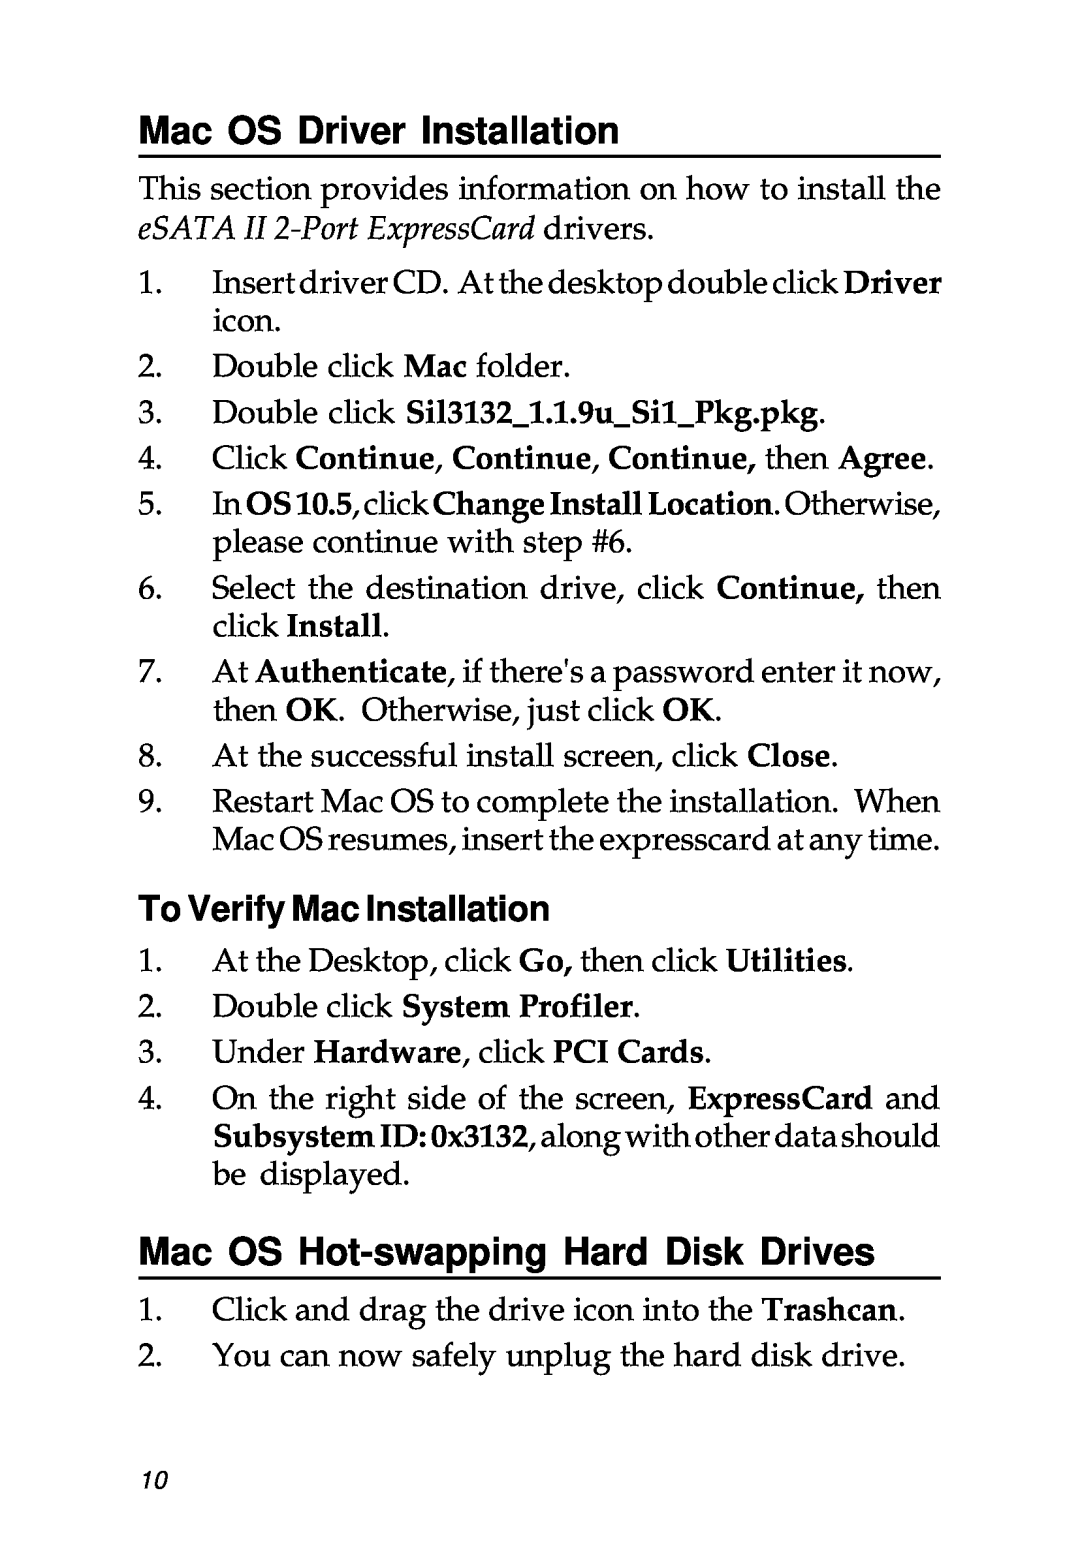 SIIG 104-0487A specifications Mac OS Driver Installation, Mac OS Hot-swapping Hard Disk Drives, To Verify Mac Installation 